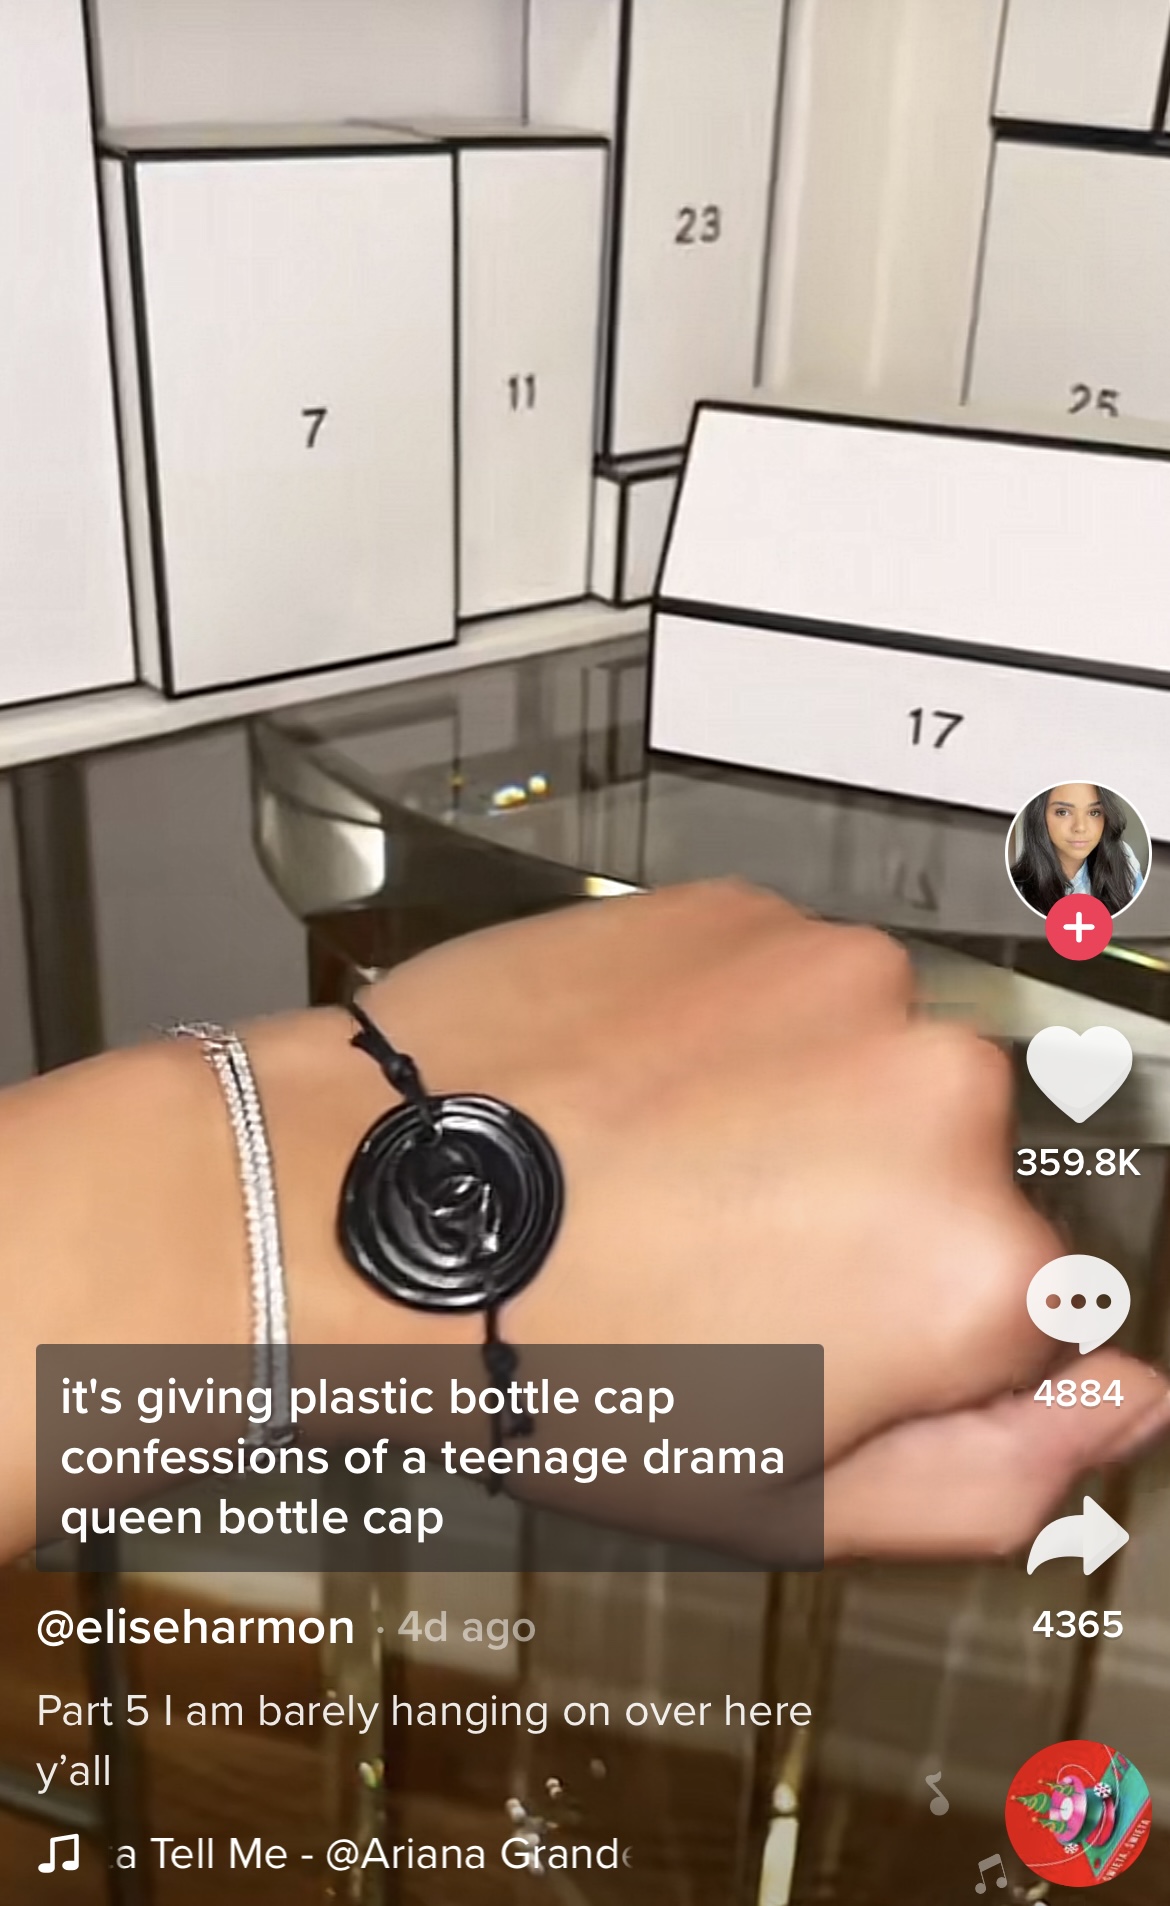 Chanel respond to backlash on TikTok over their $825 advent